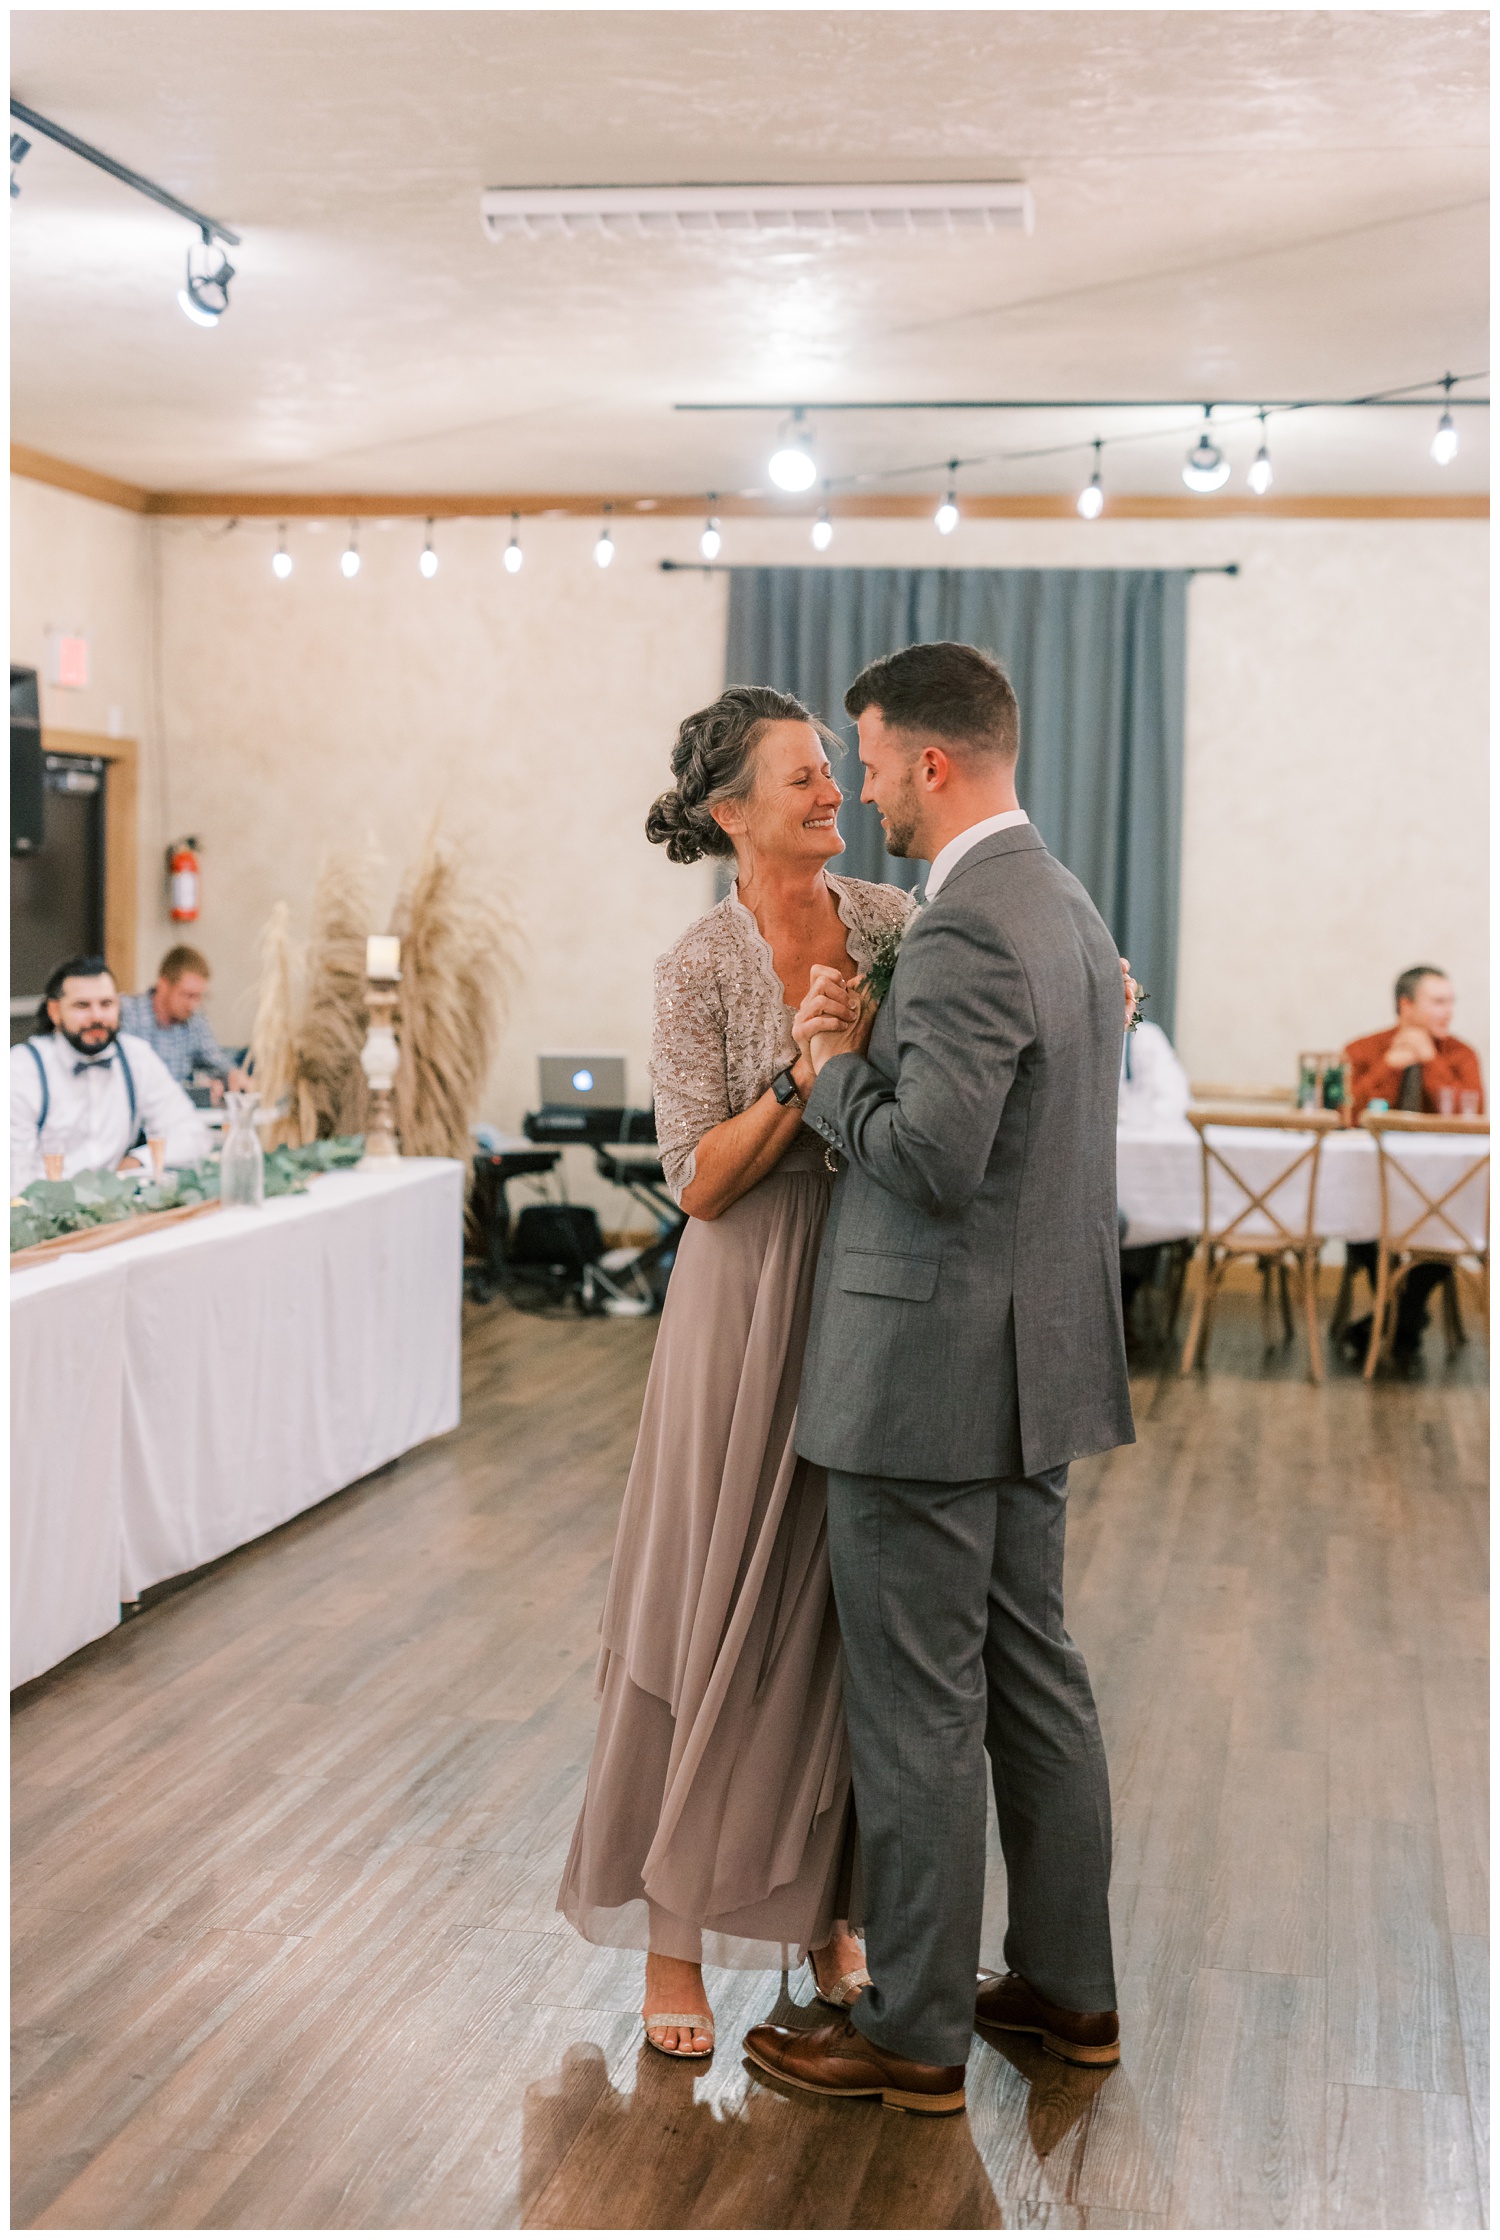 Mother and son first dance at Illinois wedding reception